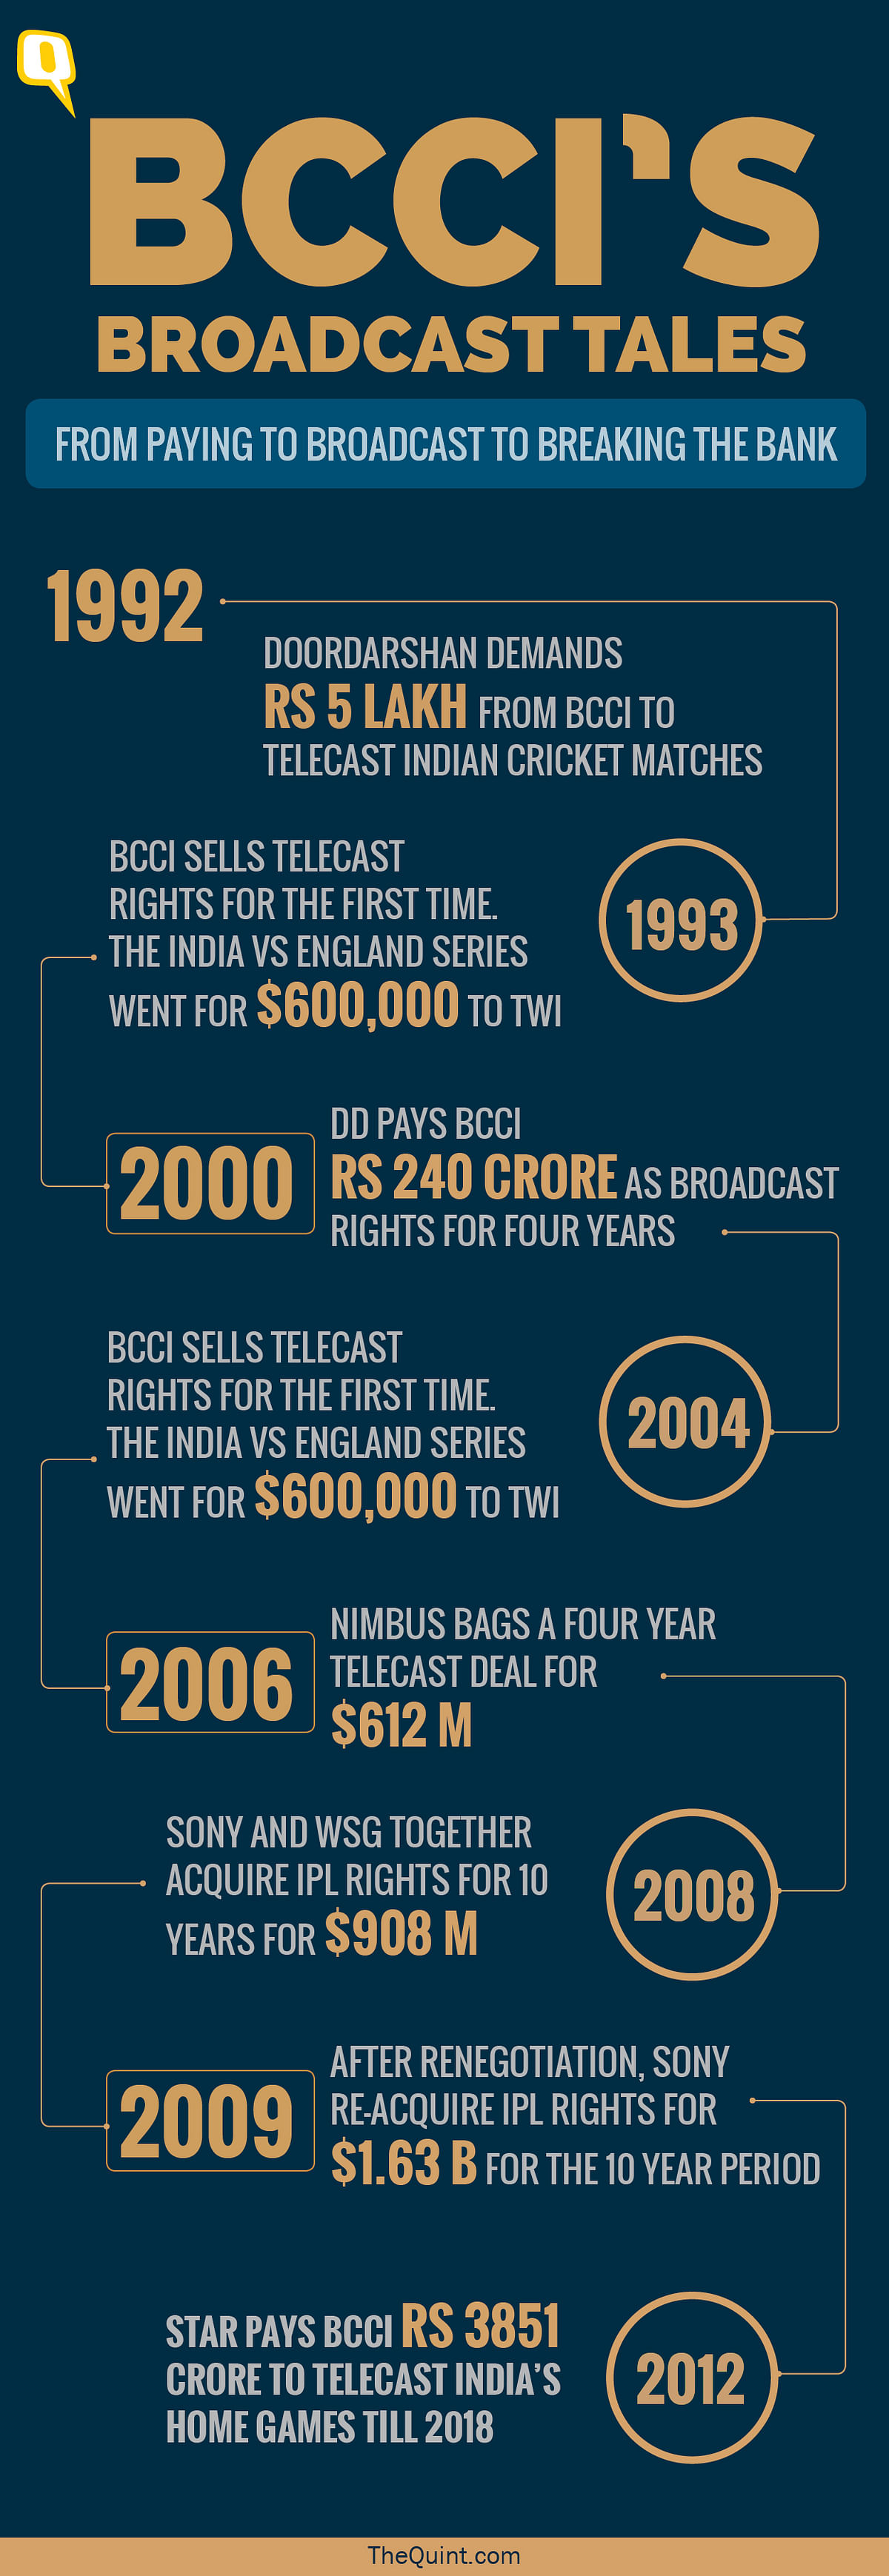 The IPL media rights have emerged to be more lucrative than the Indian team’s home matches.